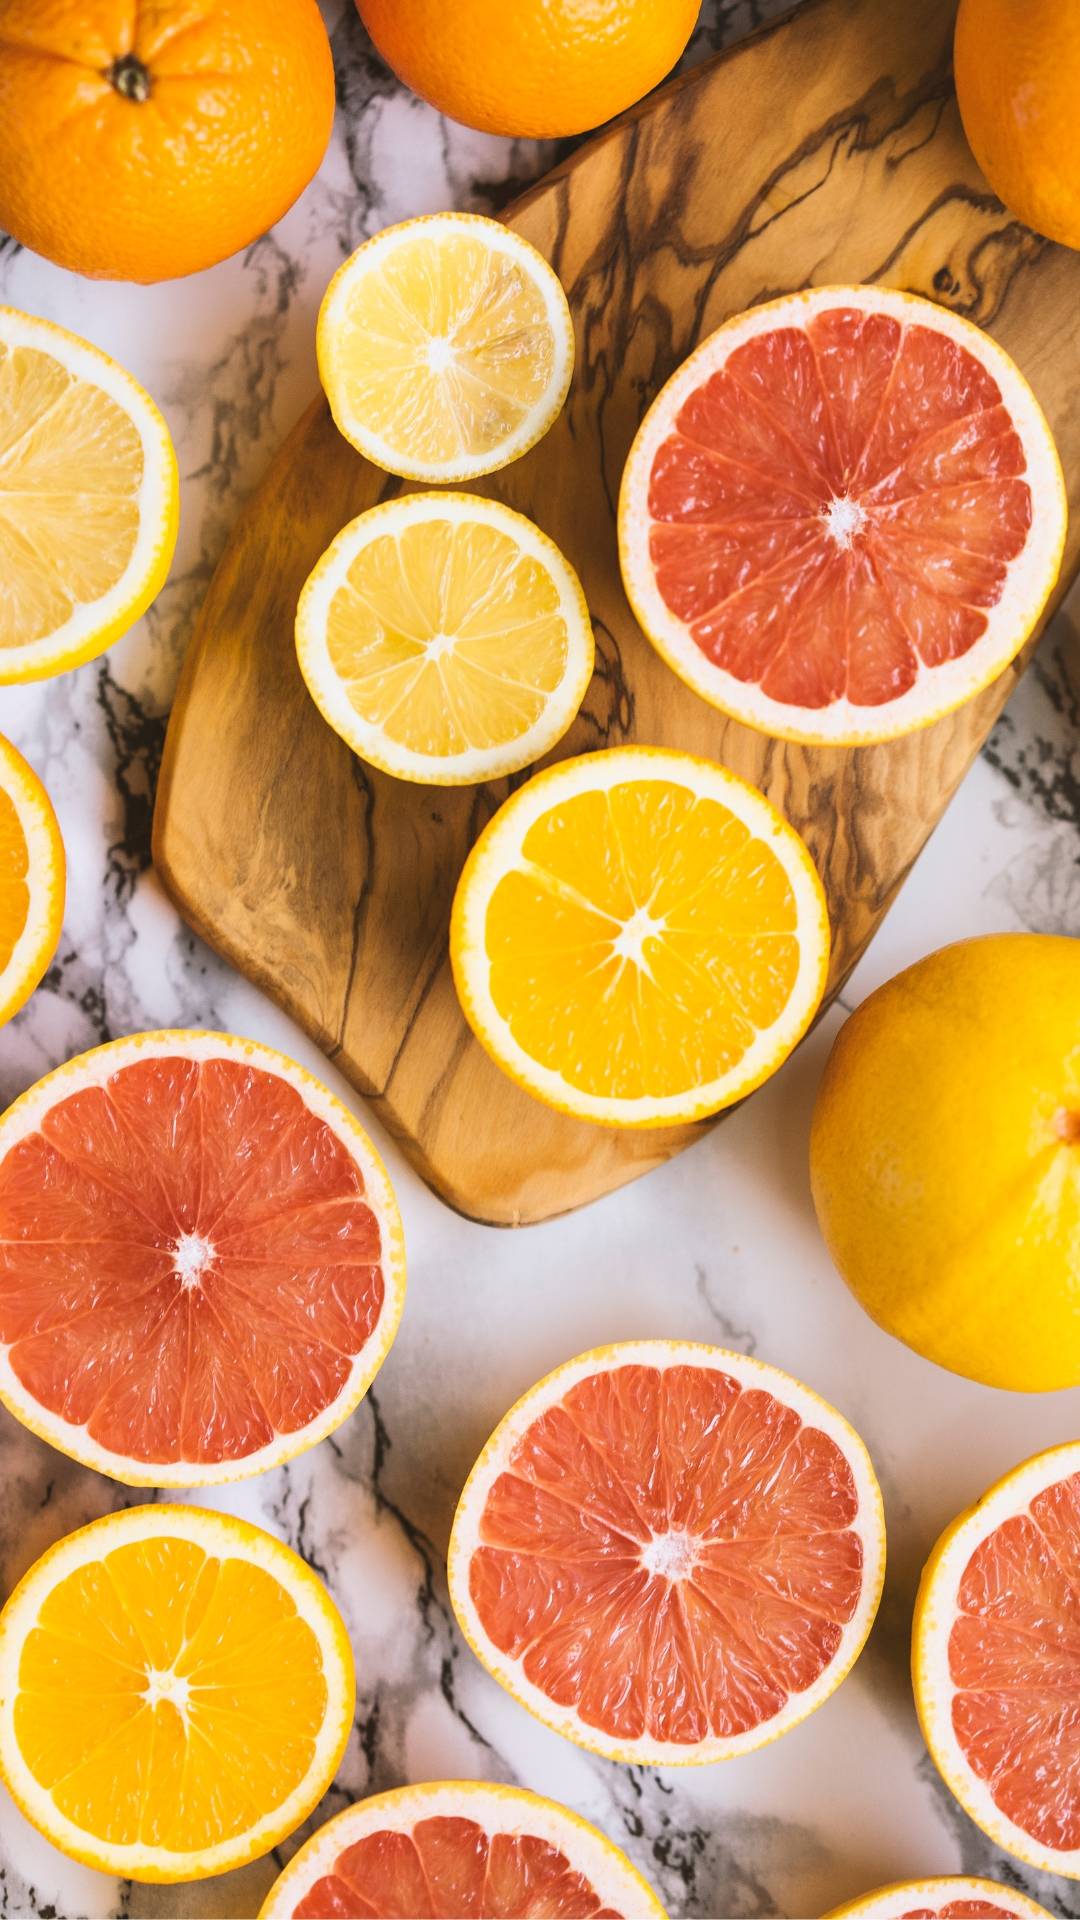 Vitamin C reduces oxidative stress to lower neurological inflammation for migraine support